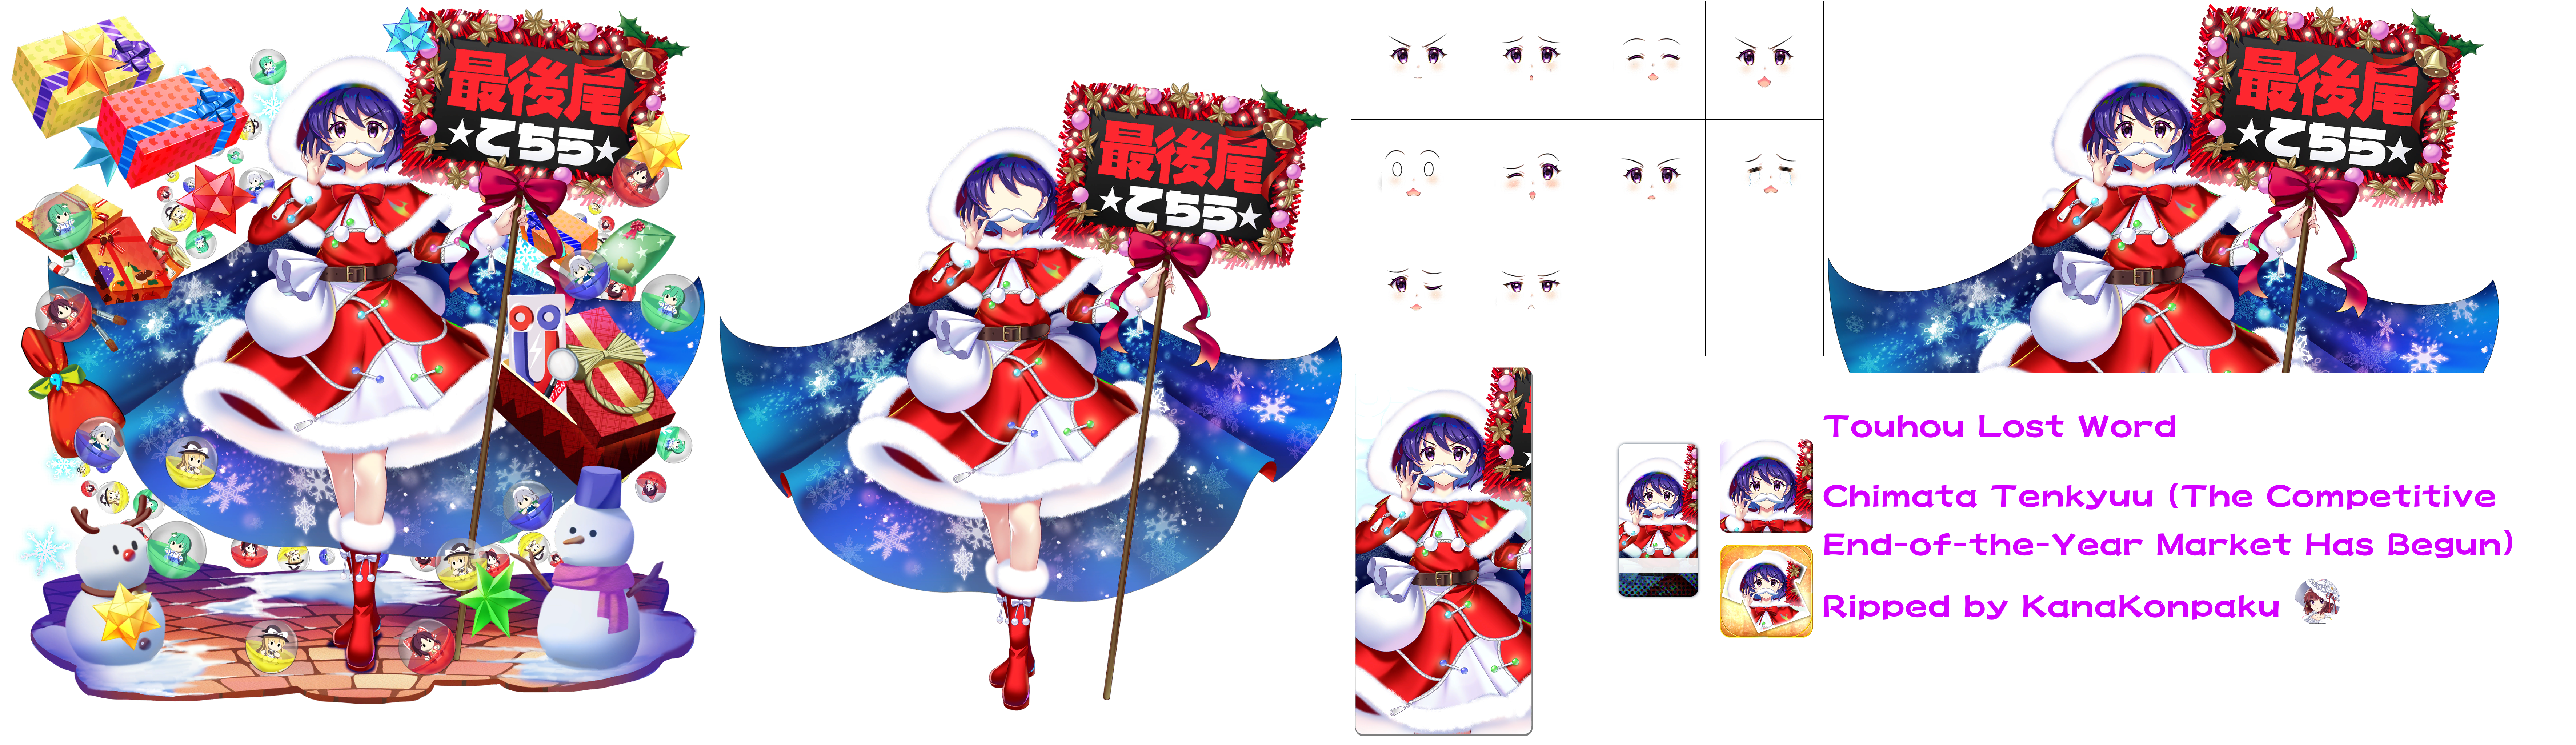 Touhou LostWord - Chimata Tenkyuu (The Competitive End-of-Year Market Has Begun)